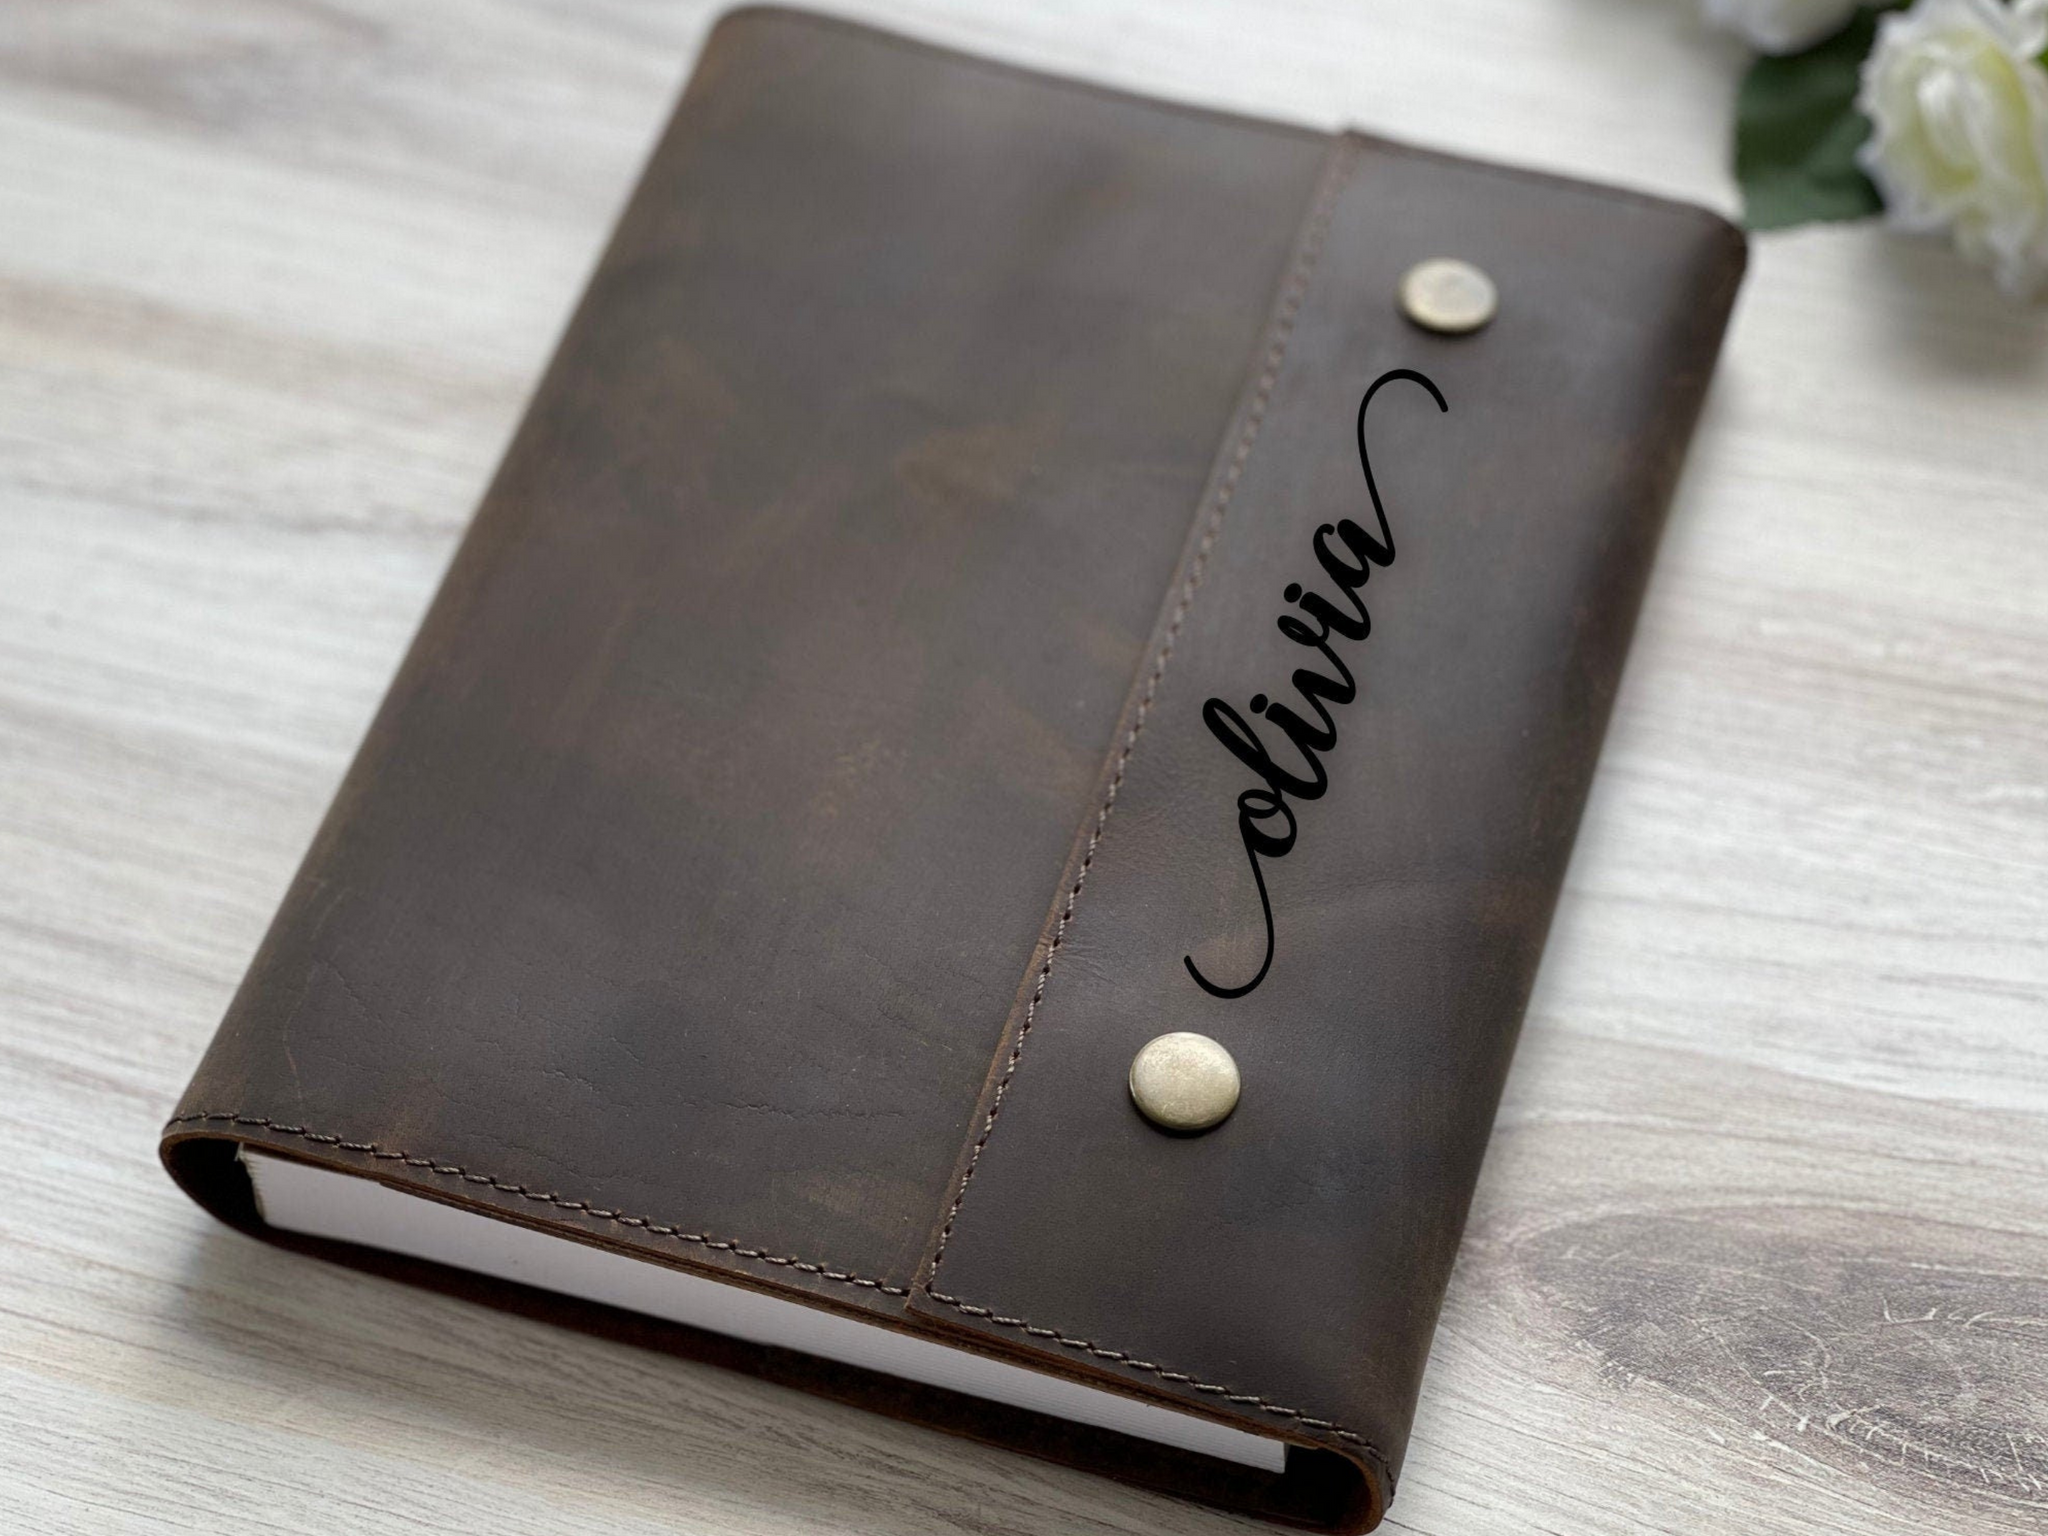 2022 Planner + Refillable Leather Cover + Rosewood Pen